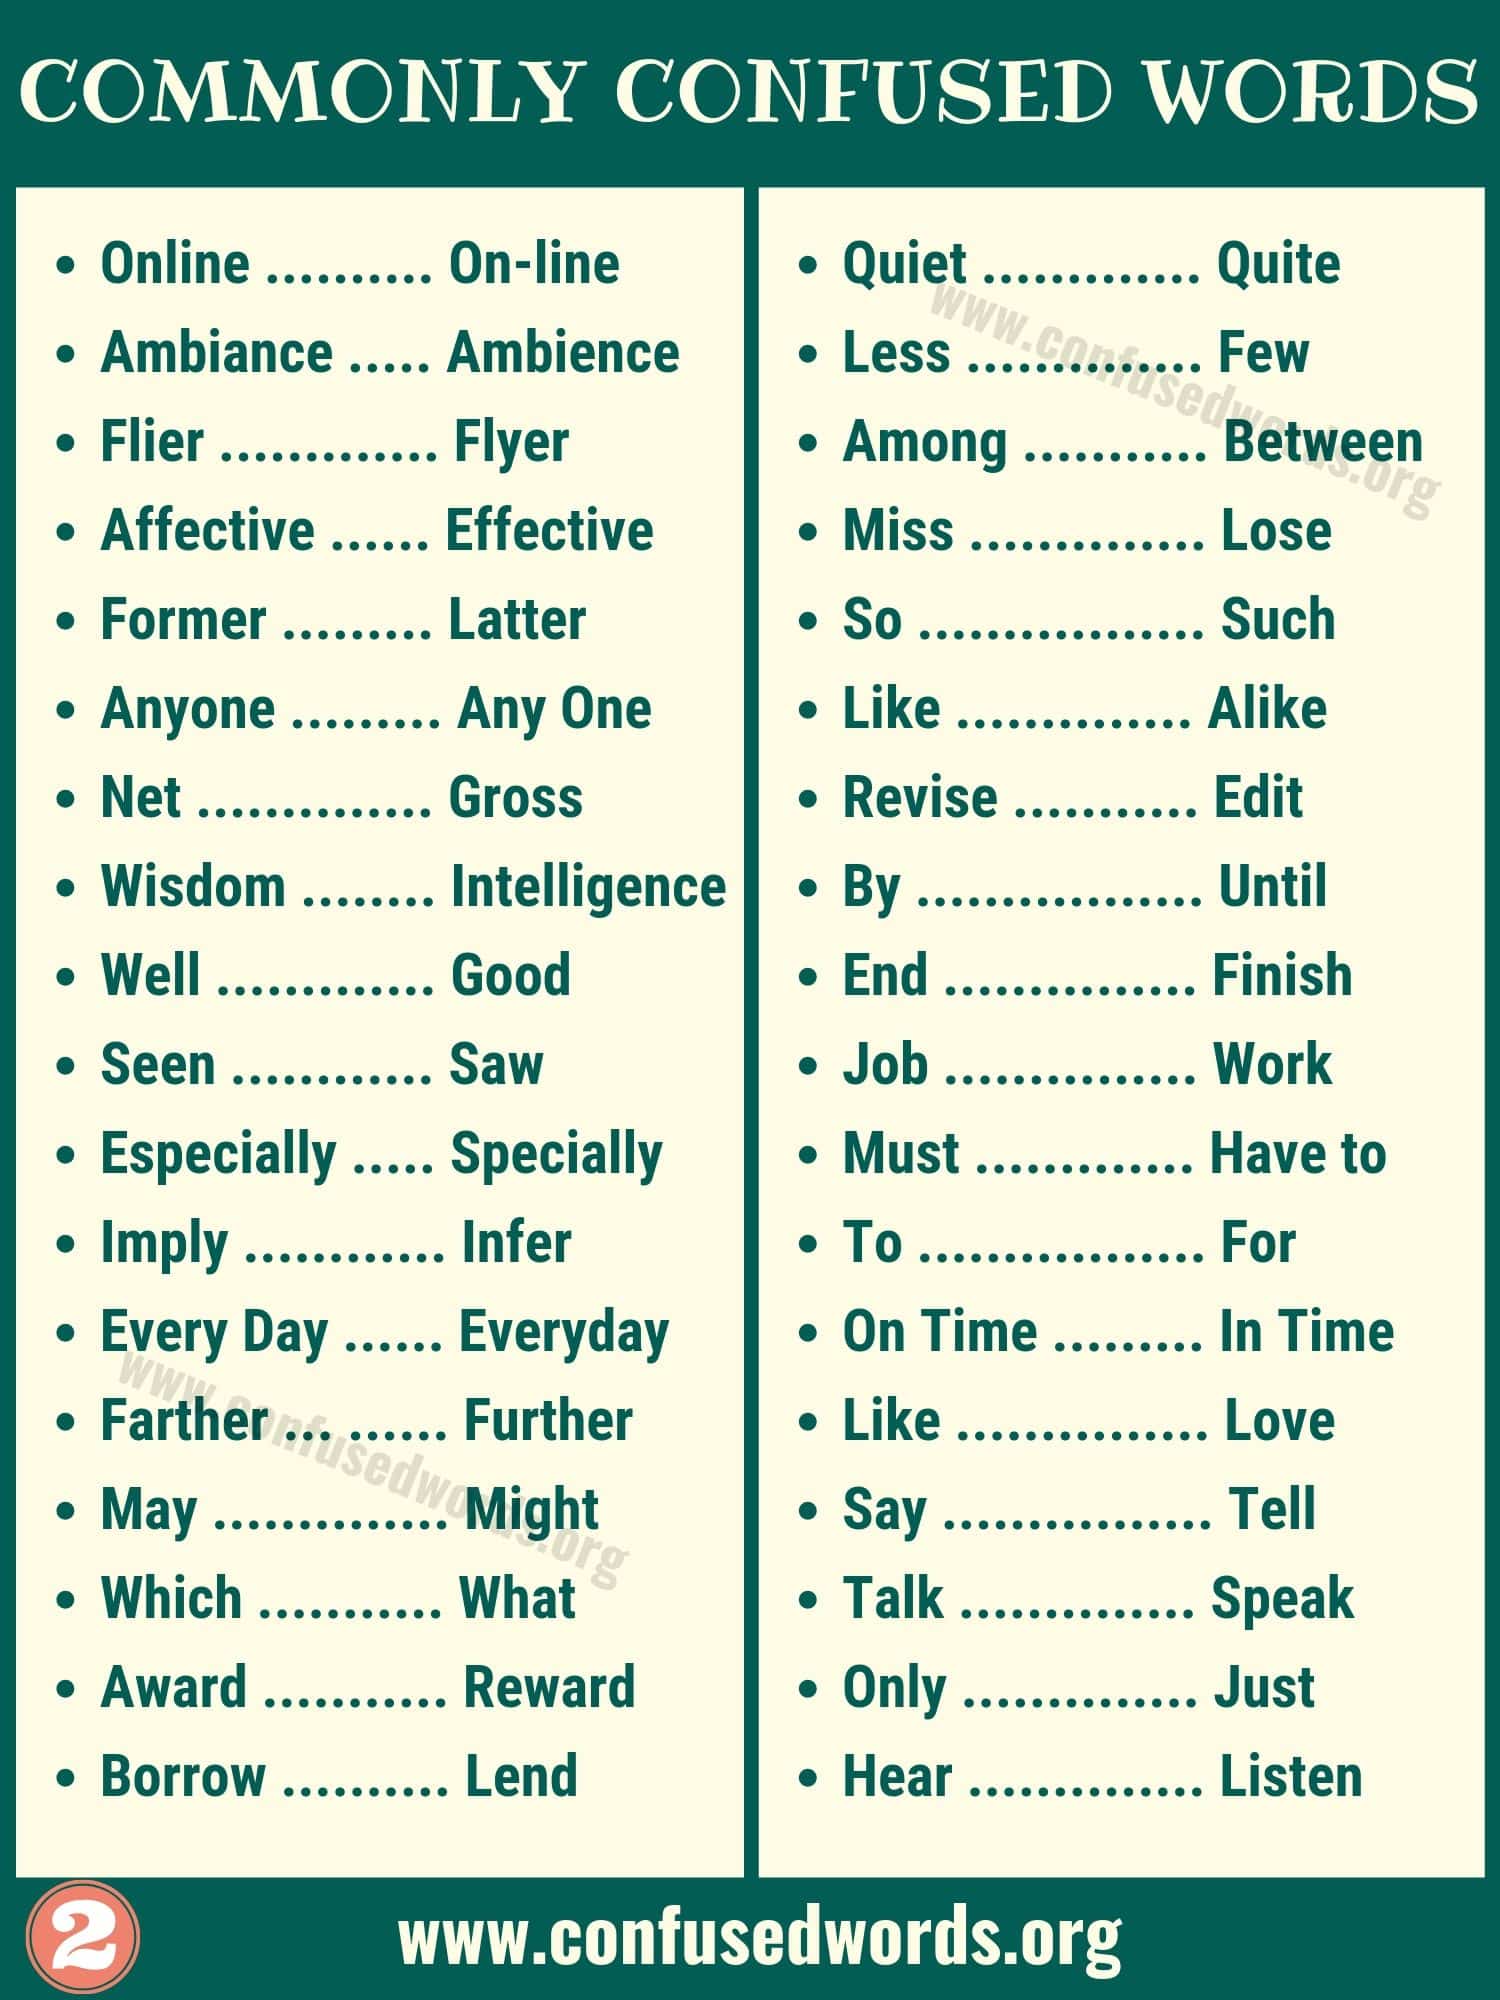 Difference Between Commonly Confused Words in English